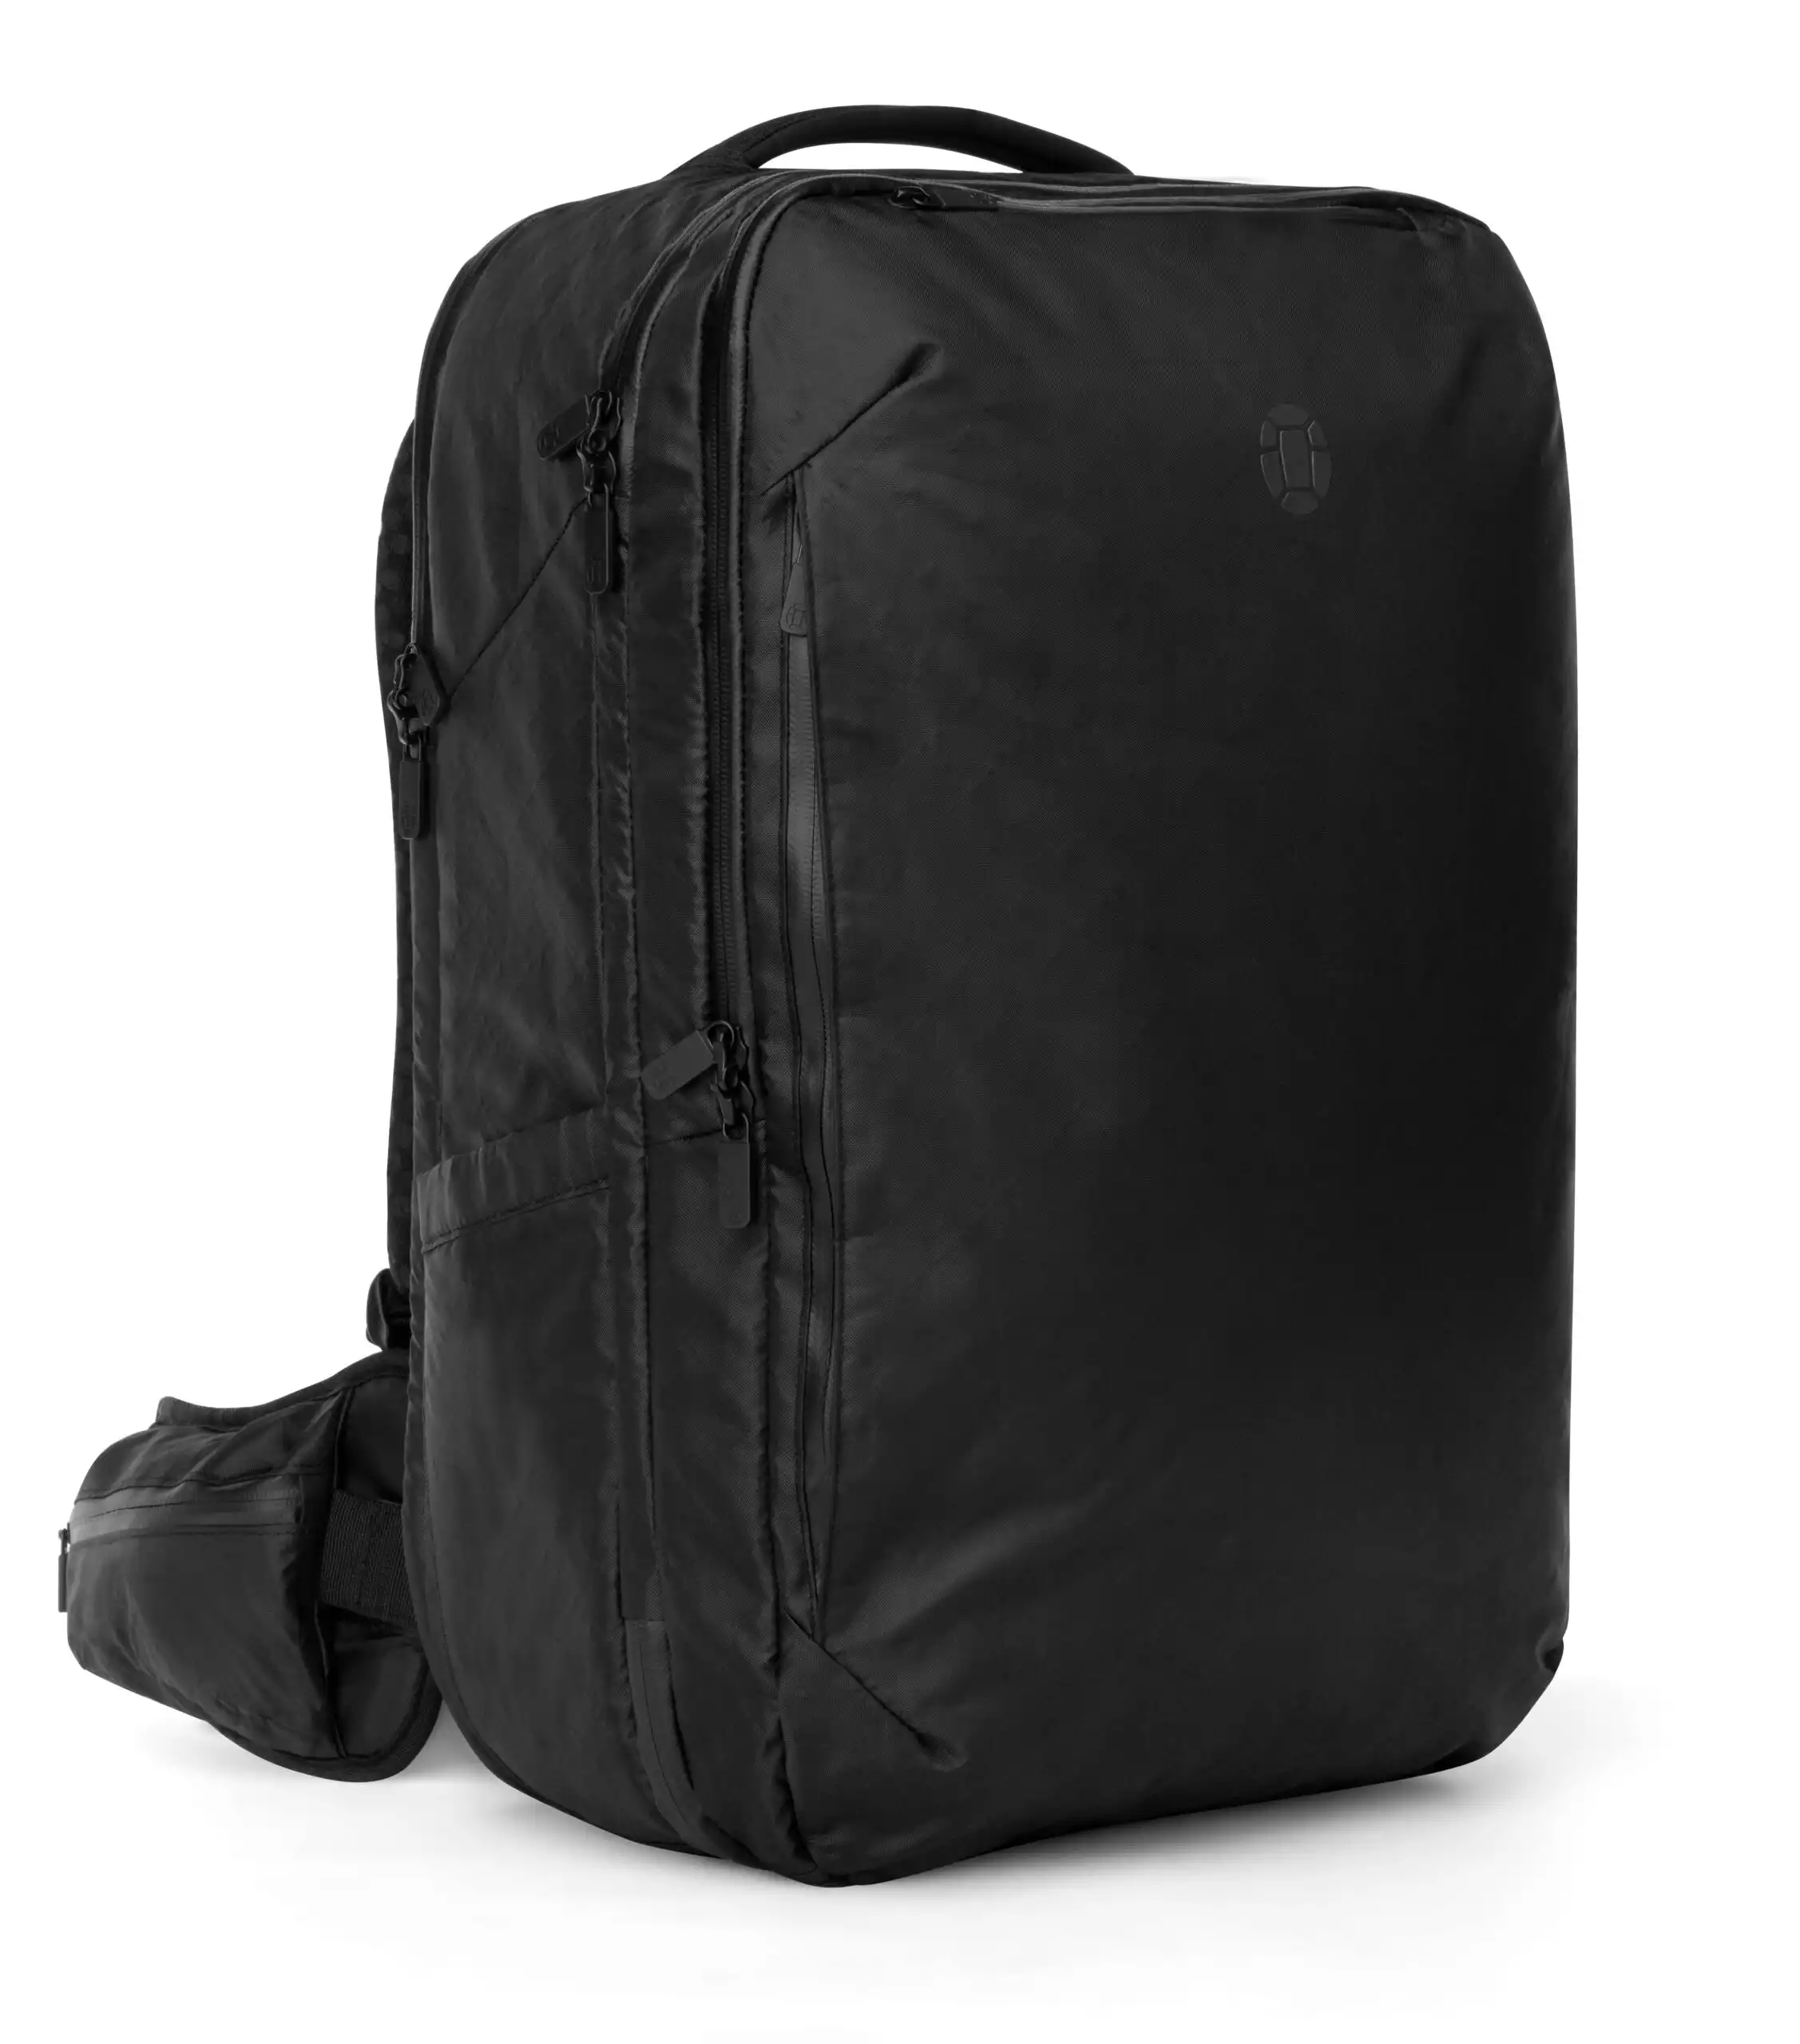 Carry-On-Sized Travel Backpacks